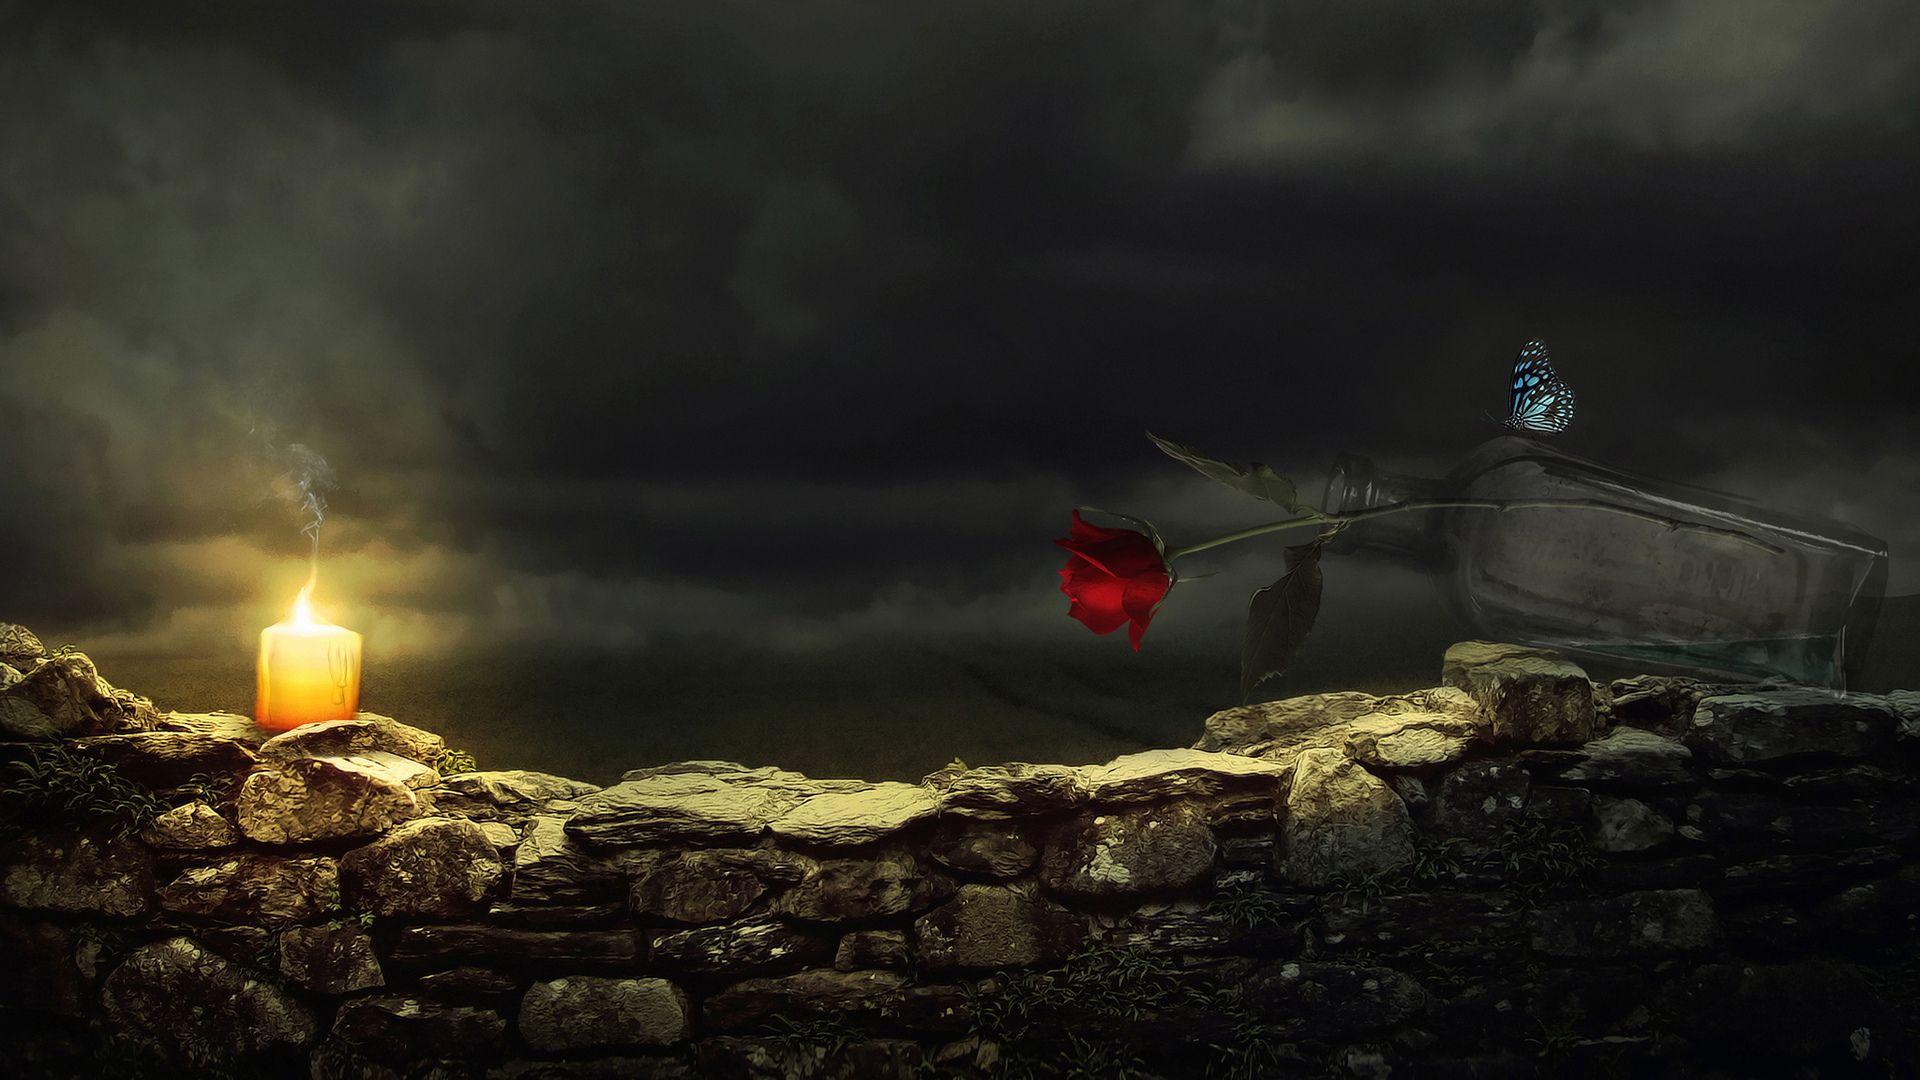 Download wallpaper night, clouds, bottle, flower, red, rose, candle